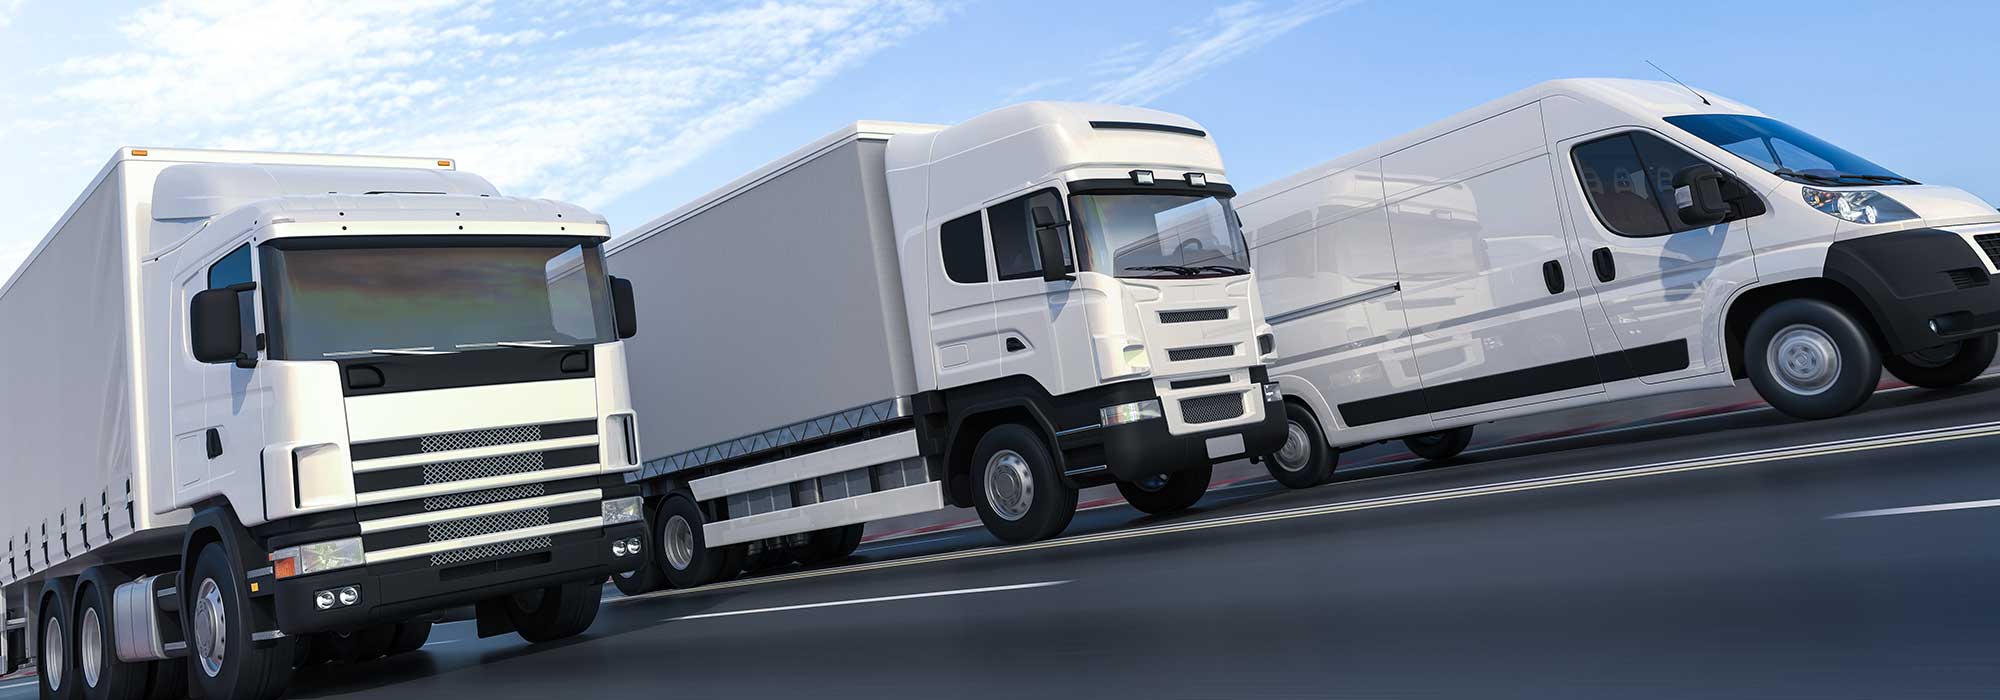 CES Ltd - Repair and Sale of Commercial Vehicles